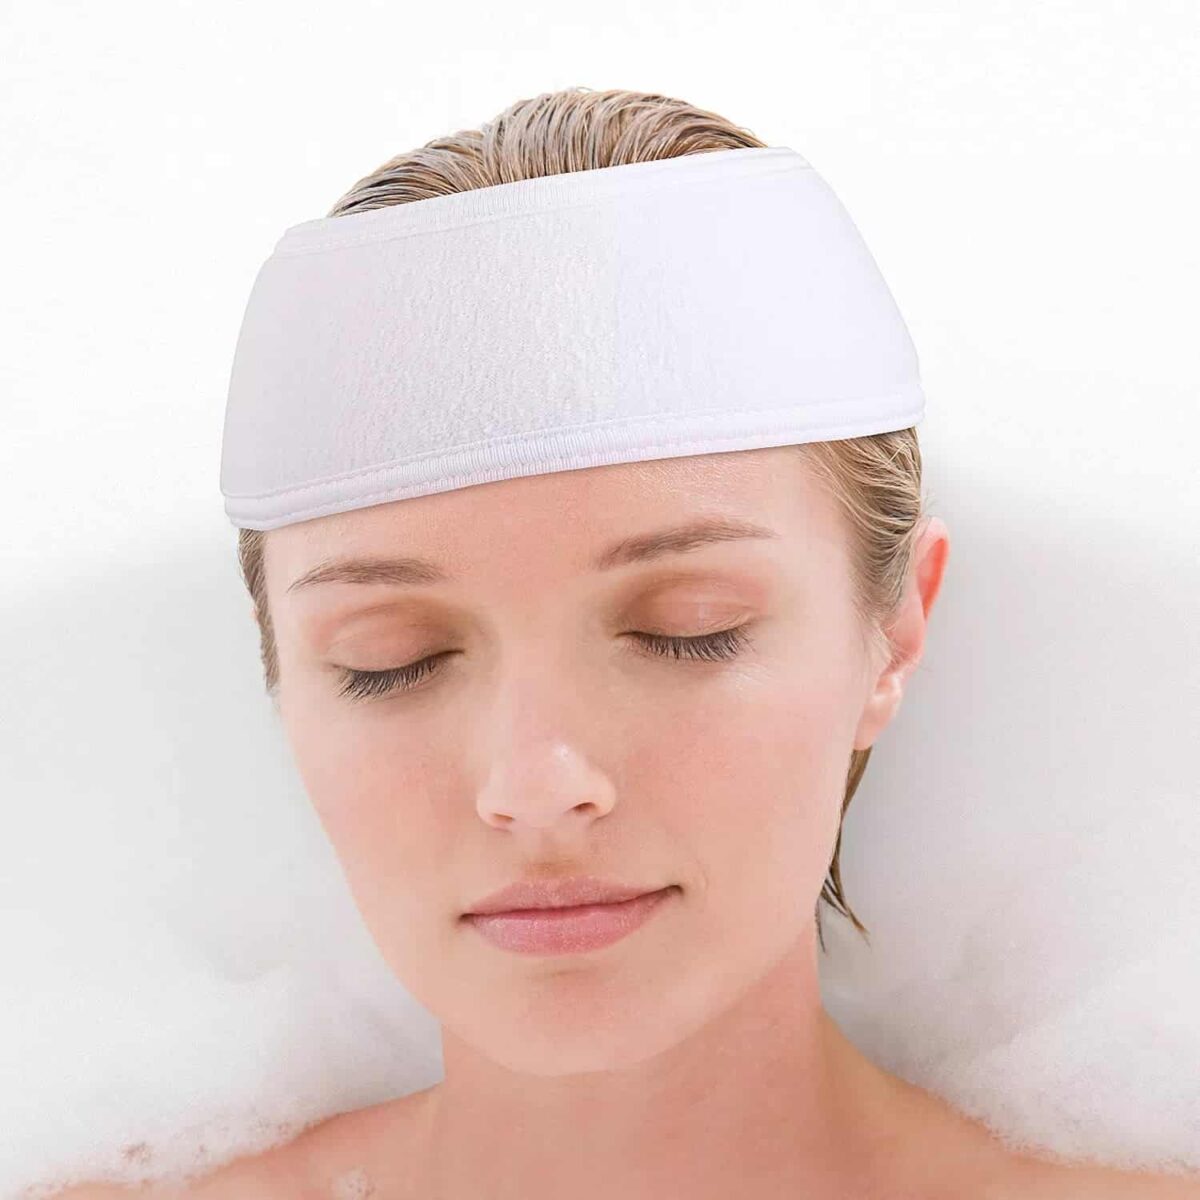 women spa headband stretchable hair band for makeup washing cosmetic shower 4